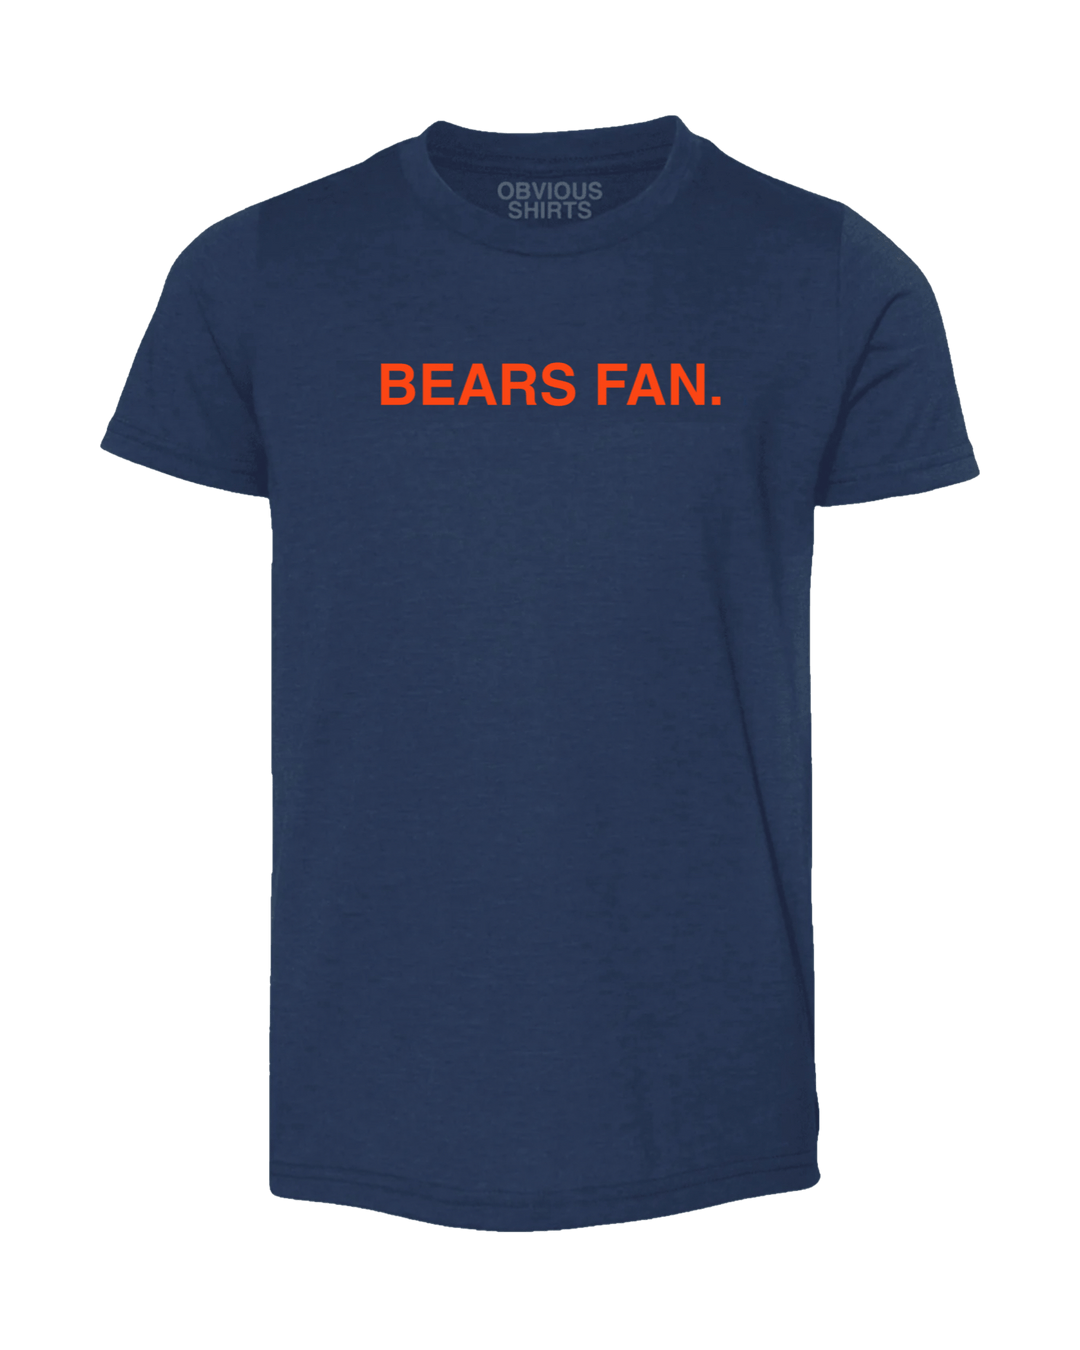 BEARS FAN. (YOUTH) - OBVIOUS SHIRTS